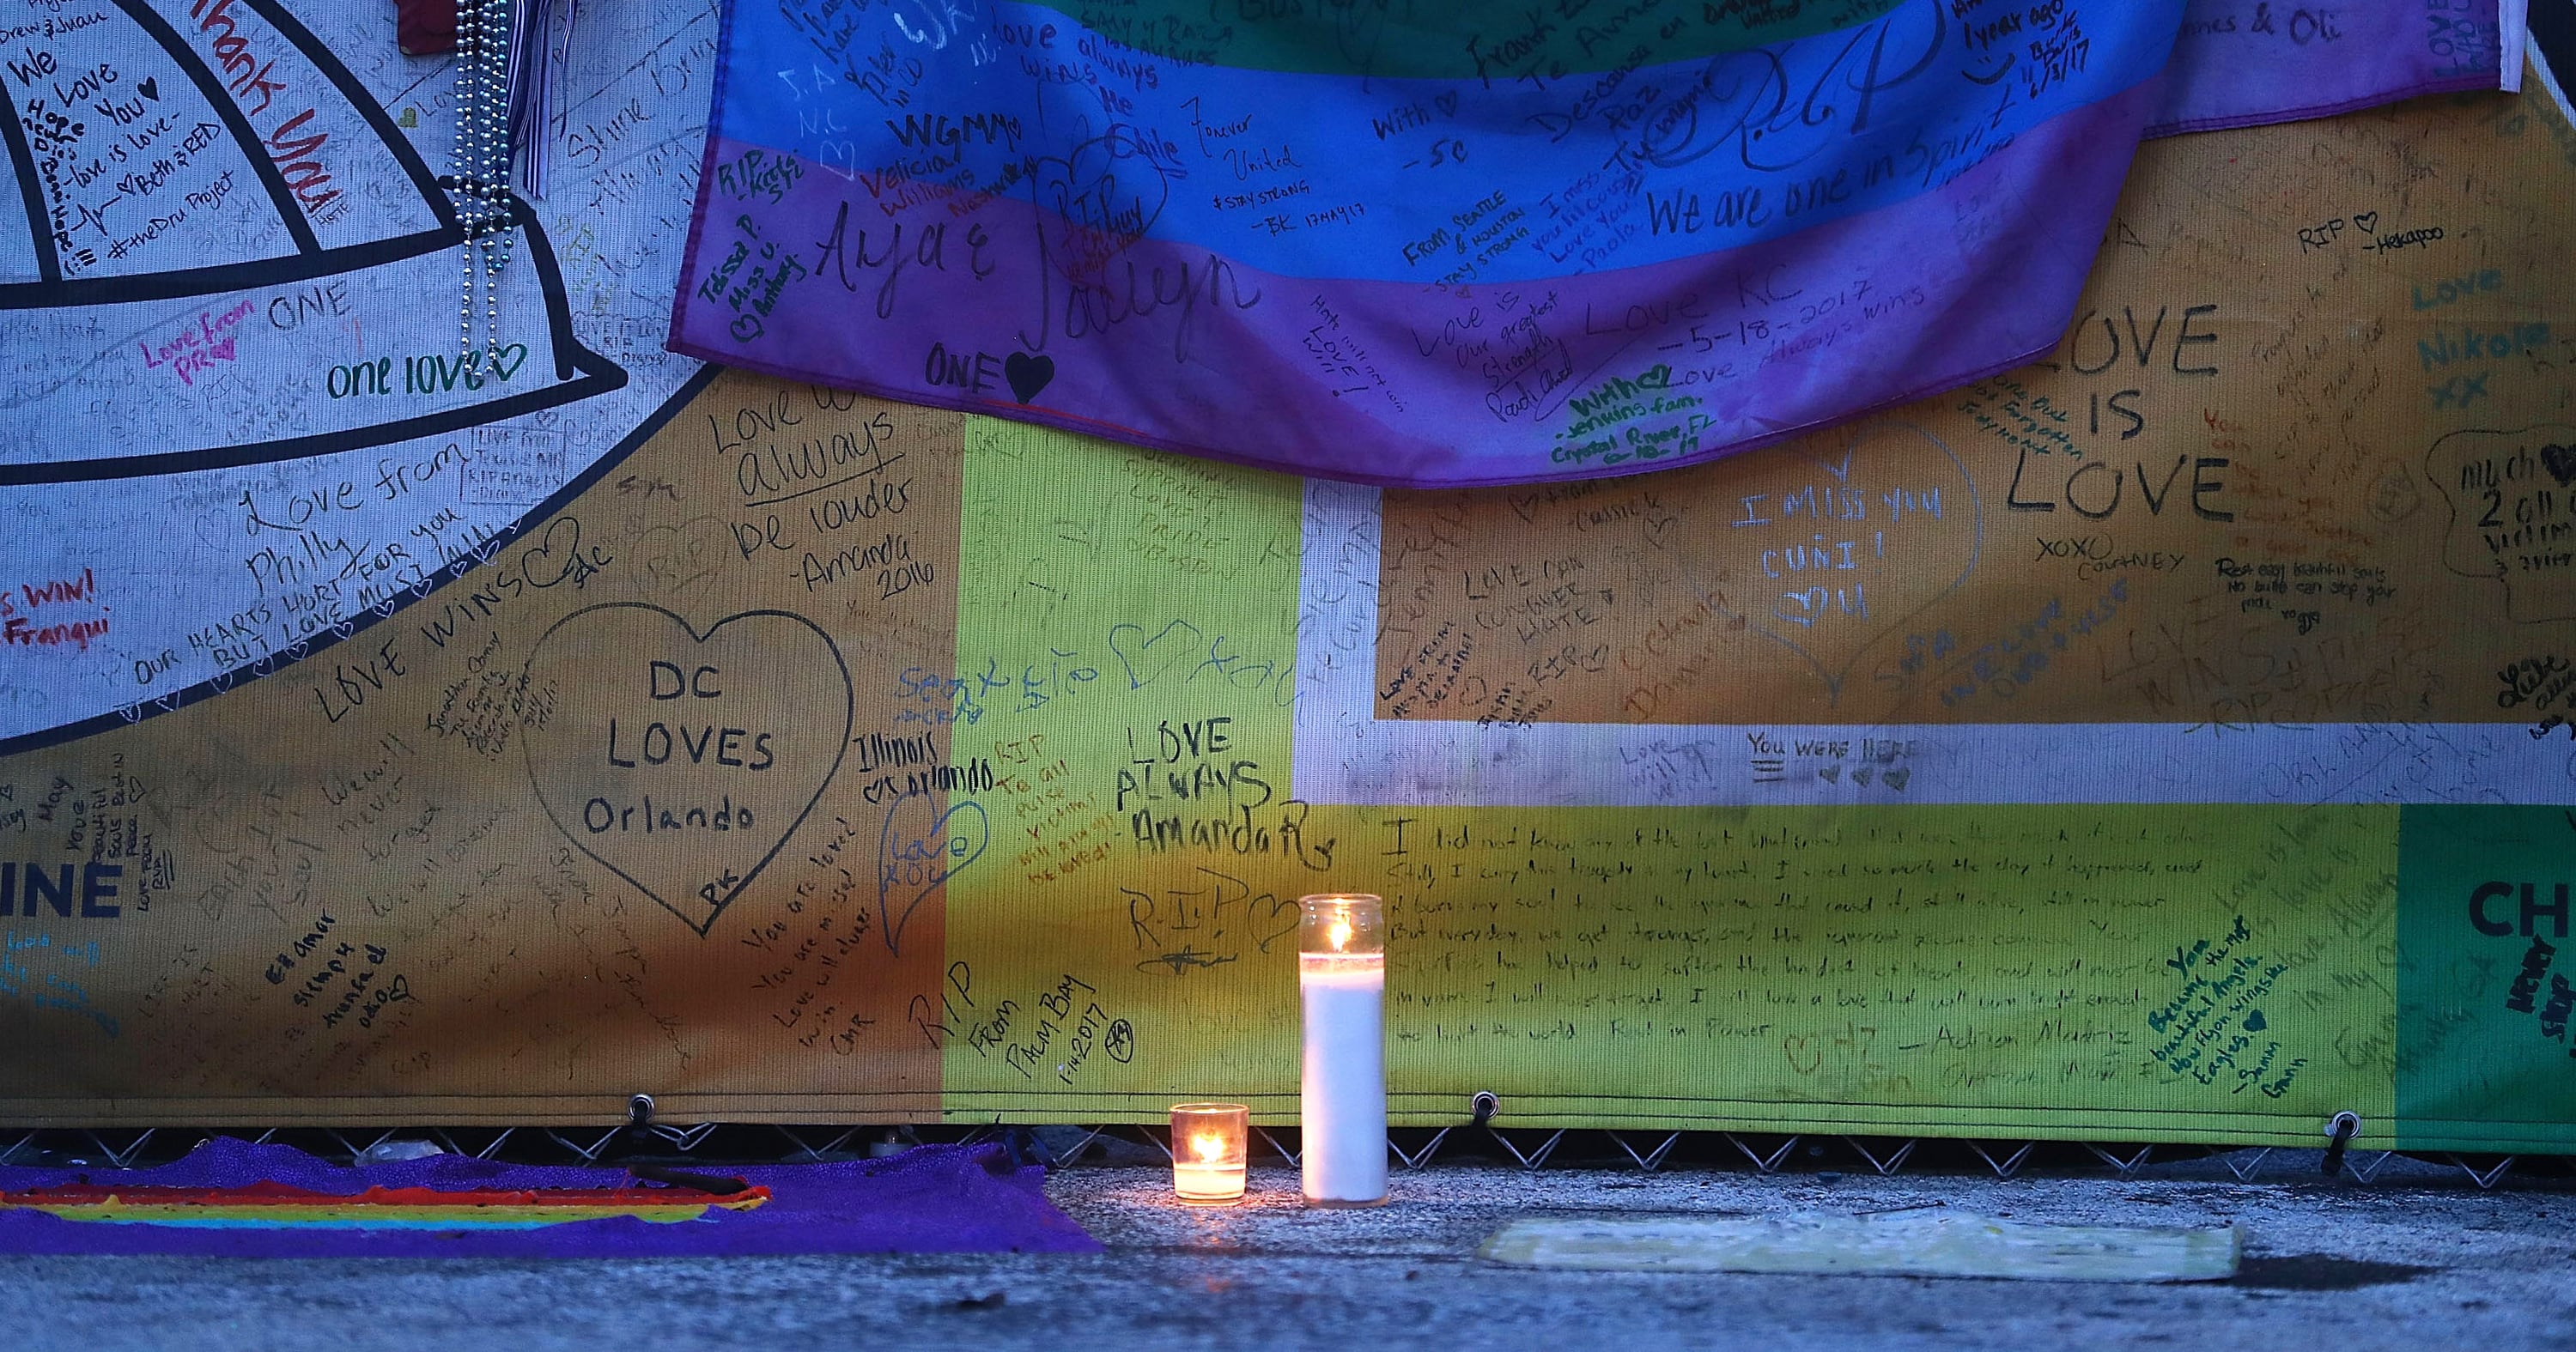 My Best Friend Was Killed at Pulse — I’ve Turned My Anguish Into Action